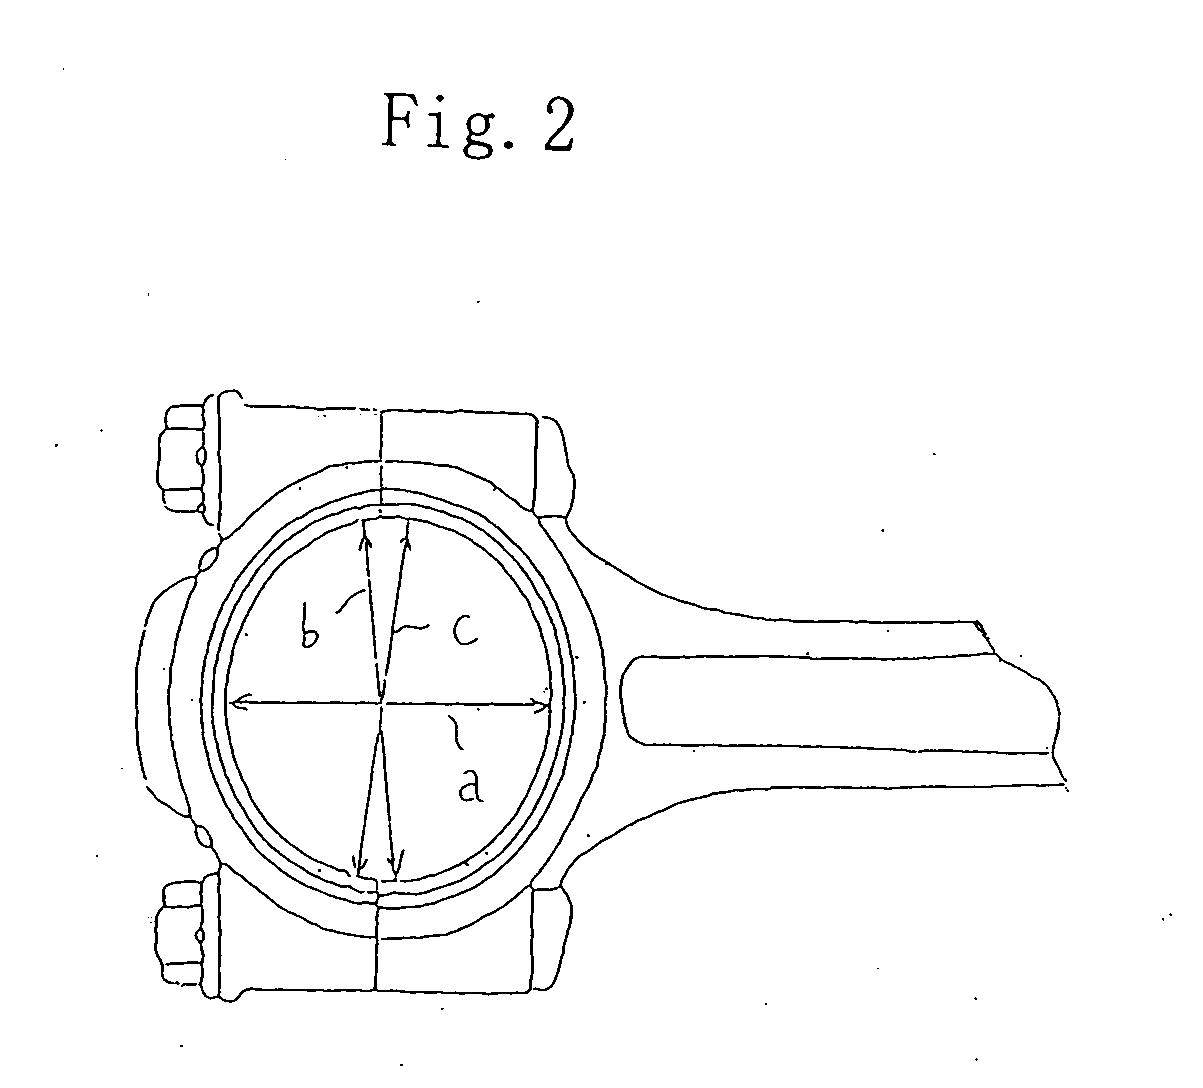 Non-heat treated connecting rod and method of manufacturing the same